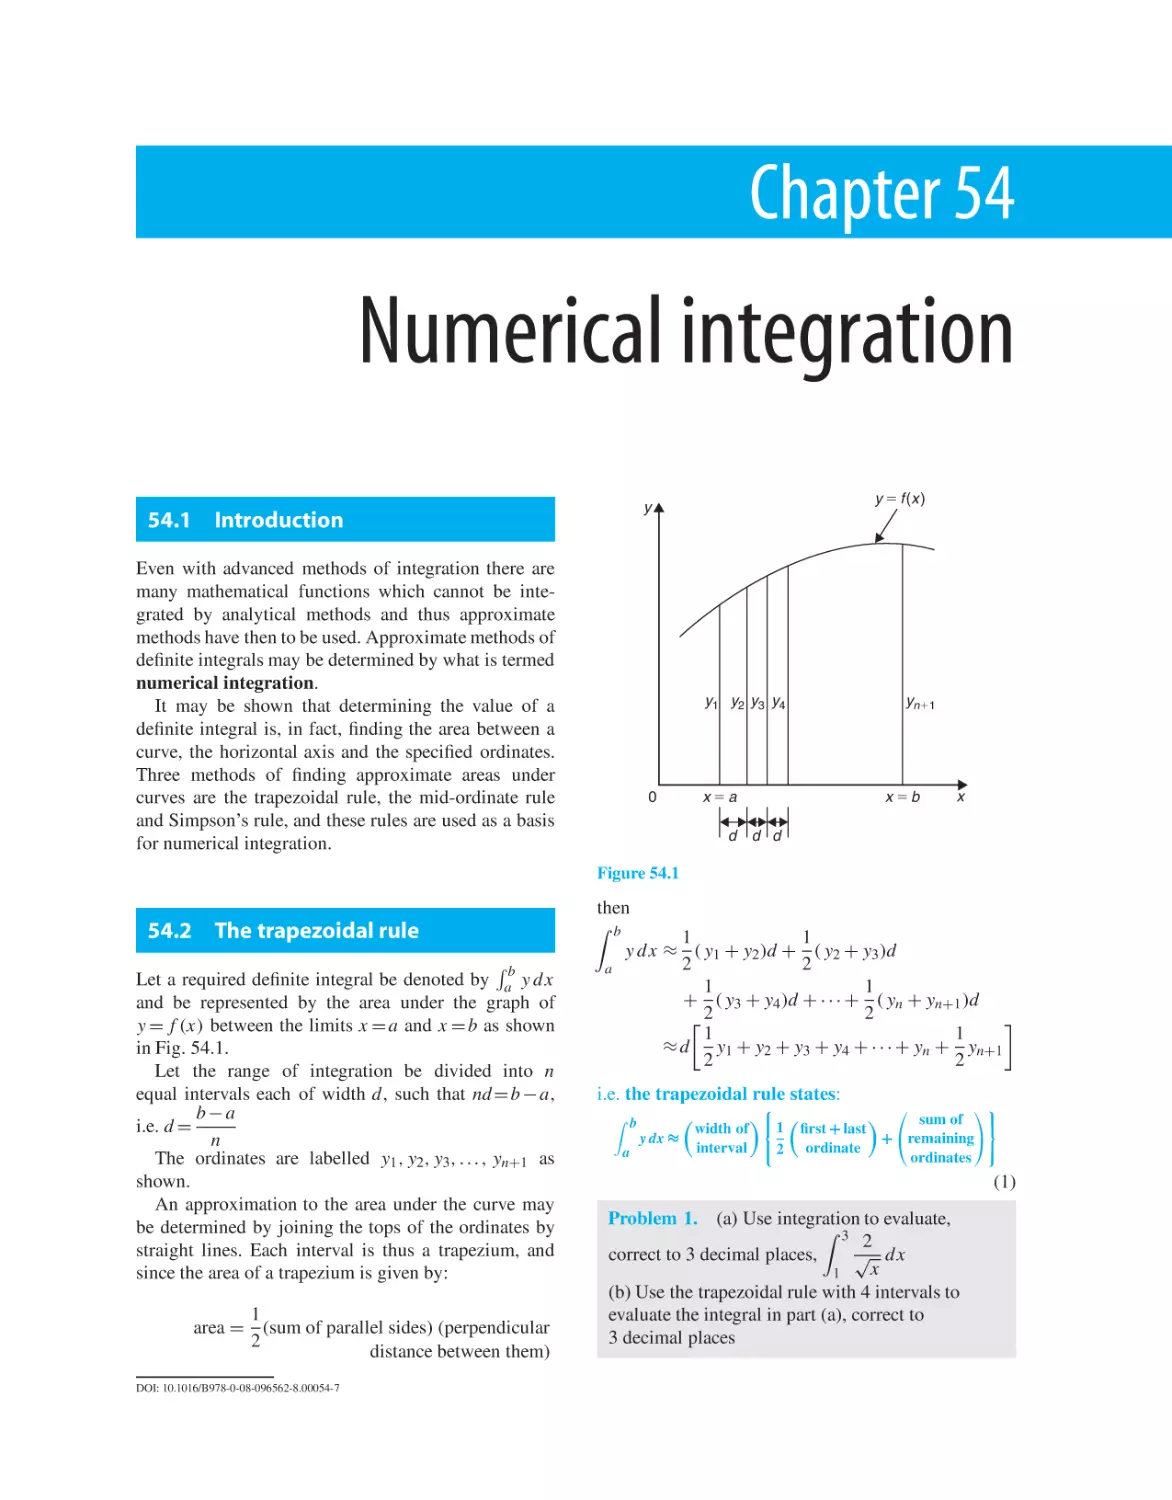 Chapter 54. Numerical integration
54.1 Introduction
54.2 The trapezoidal rule